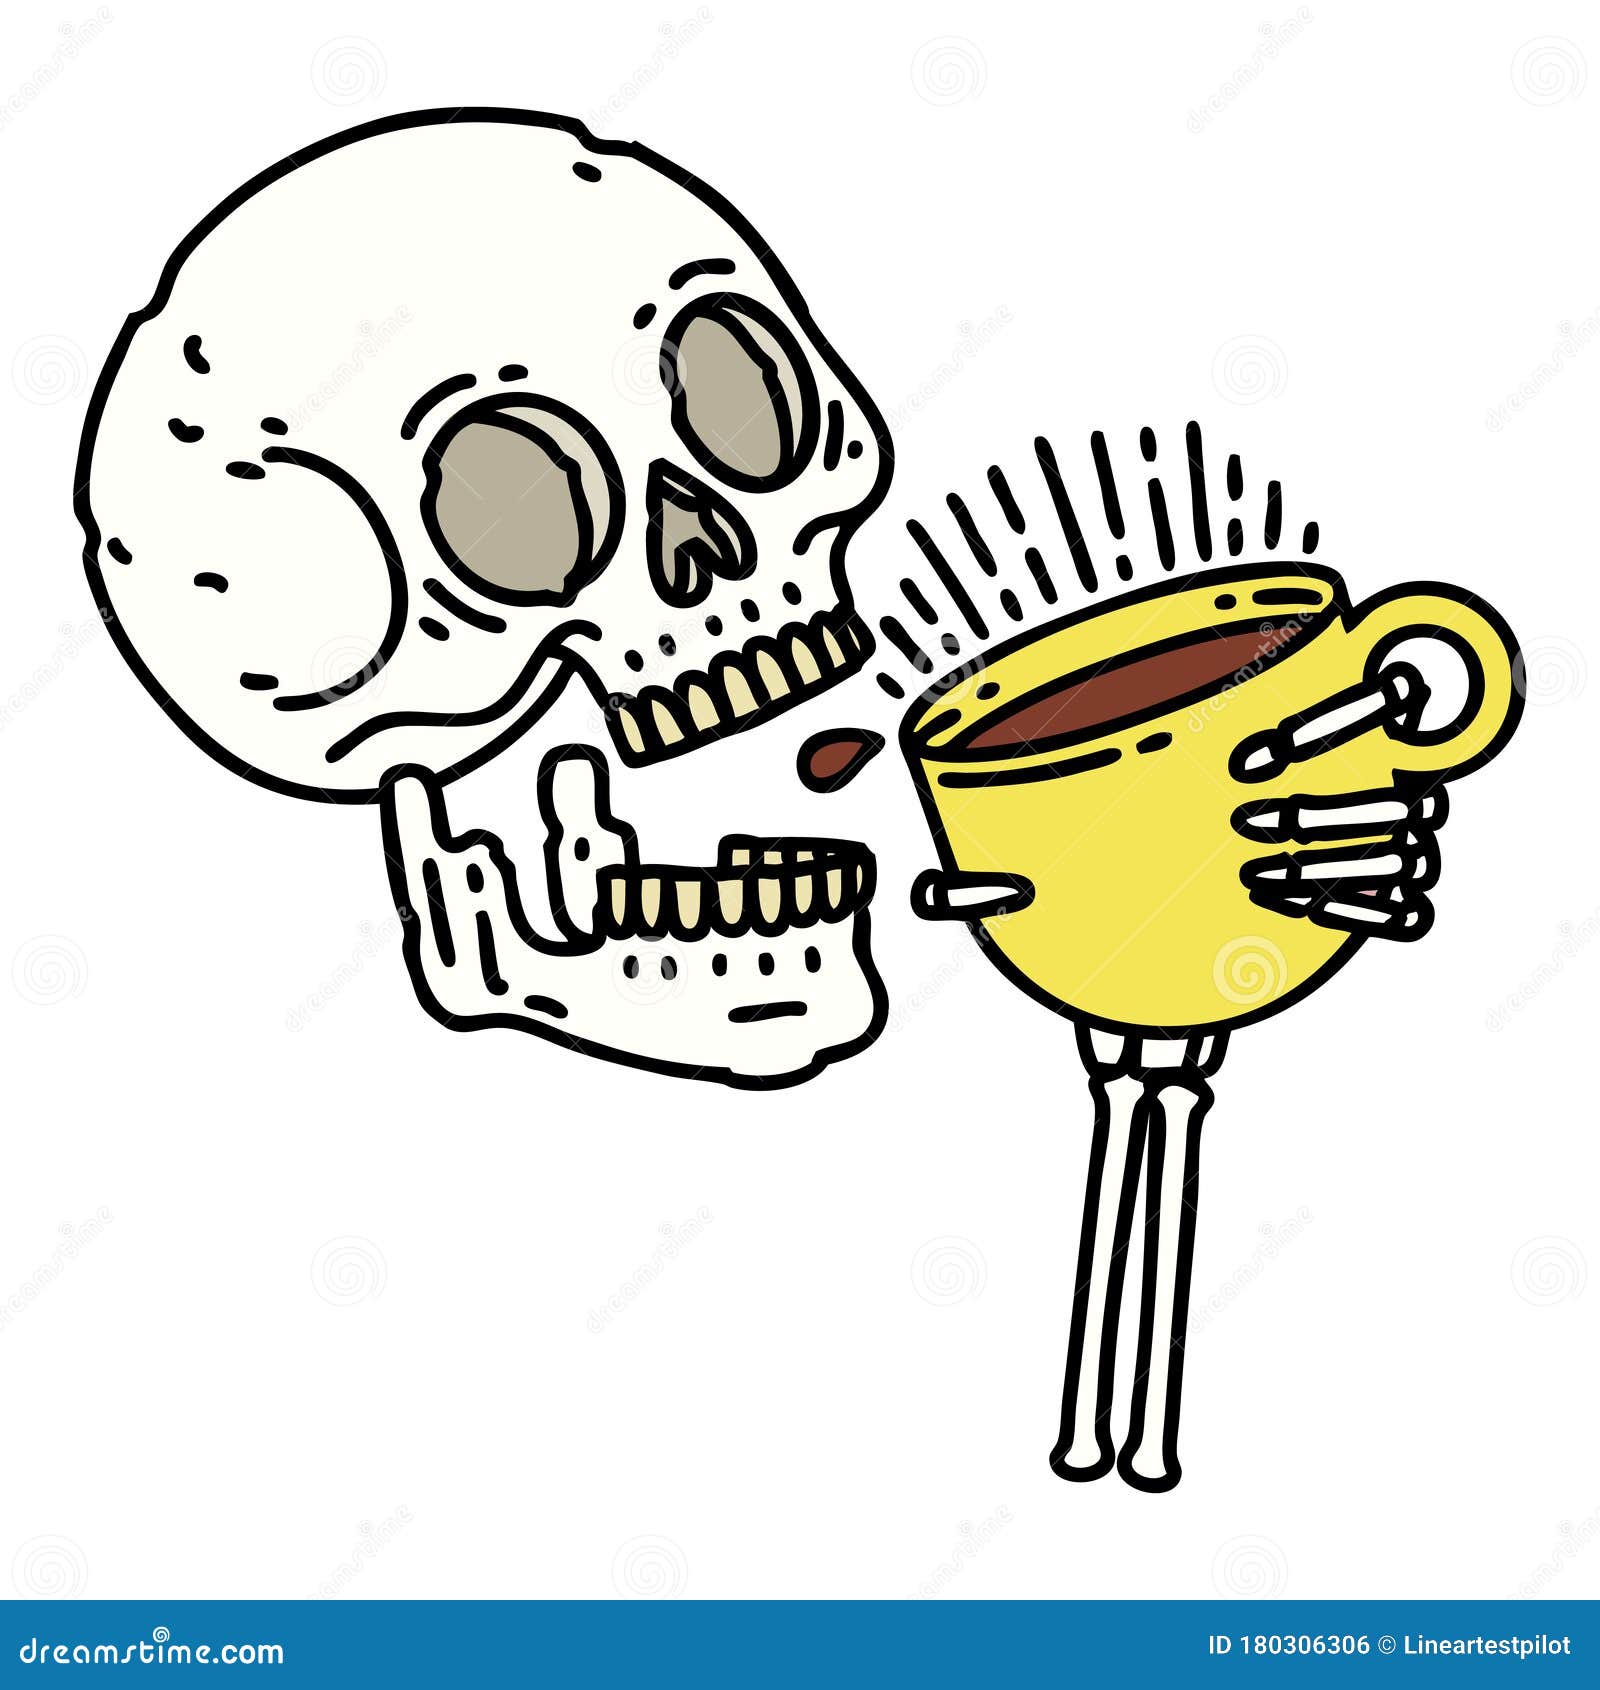 Death Wish Coffee  Feelin like this guy lately Coffee coffee and more  coffee    lildoetattoos  Facebook